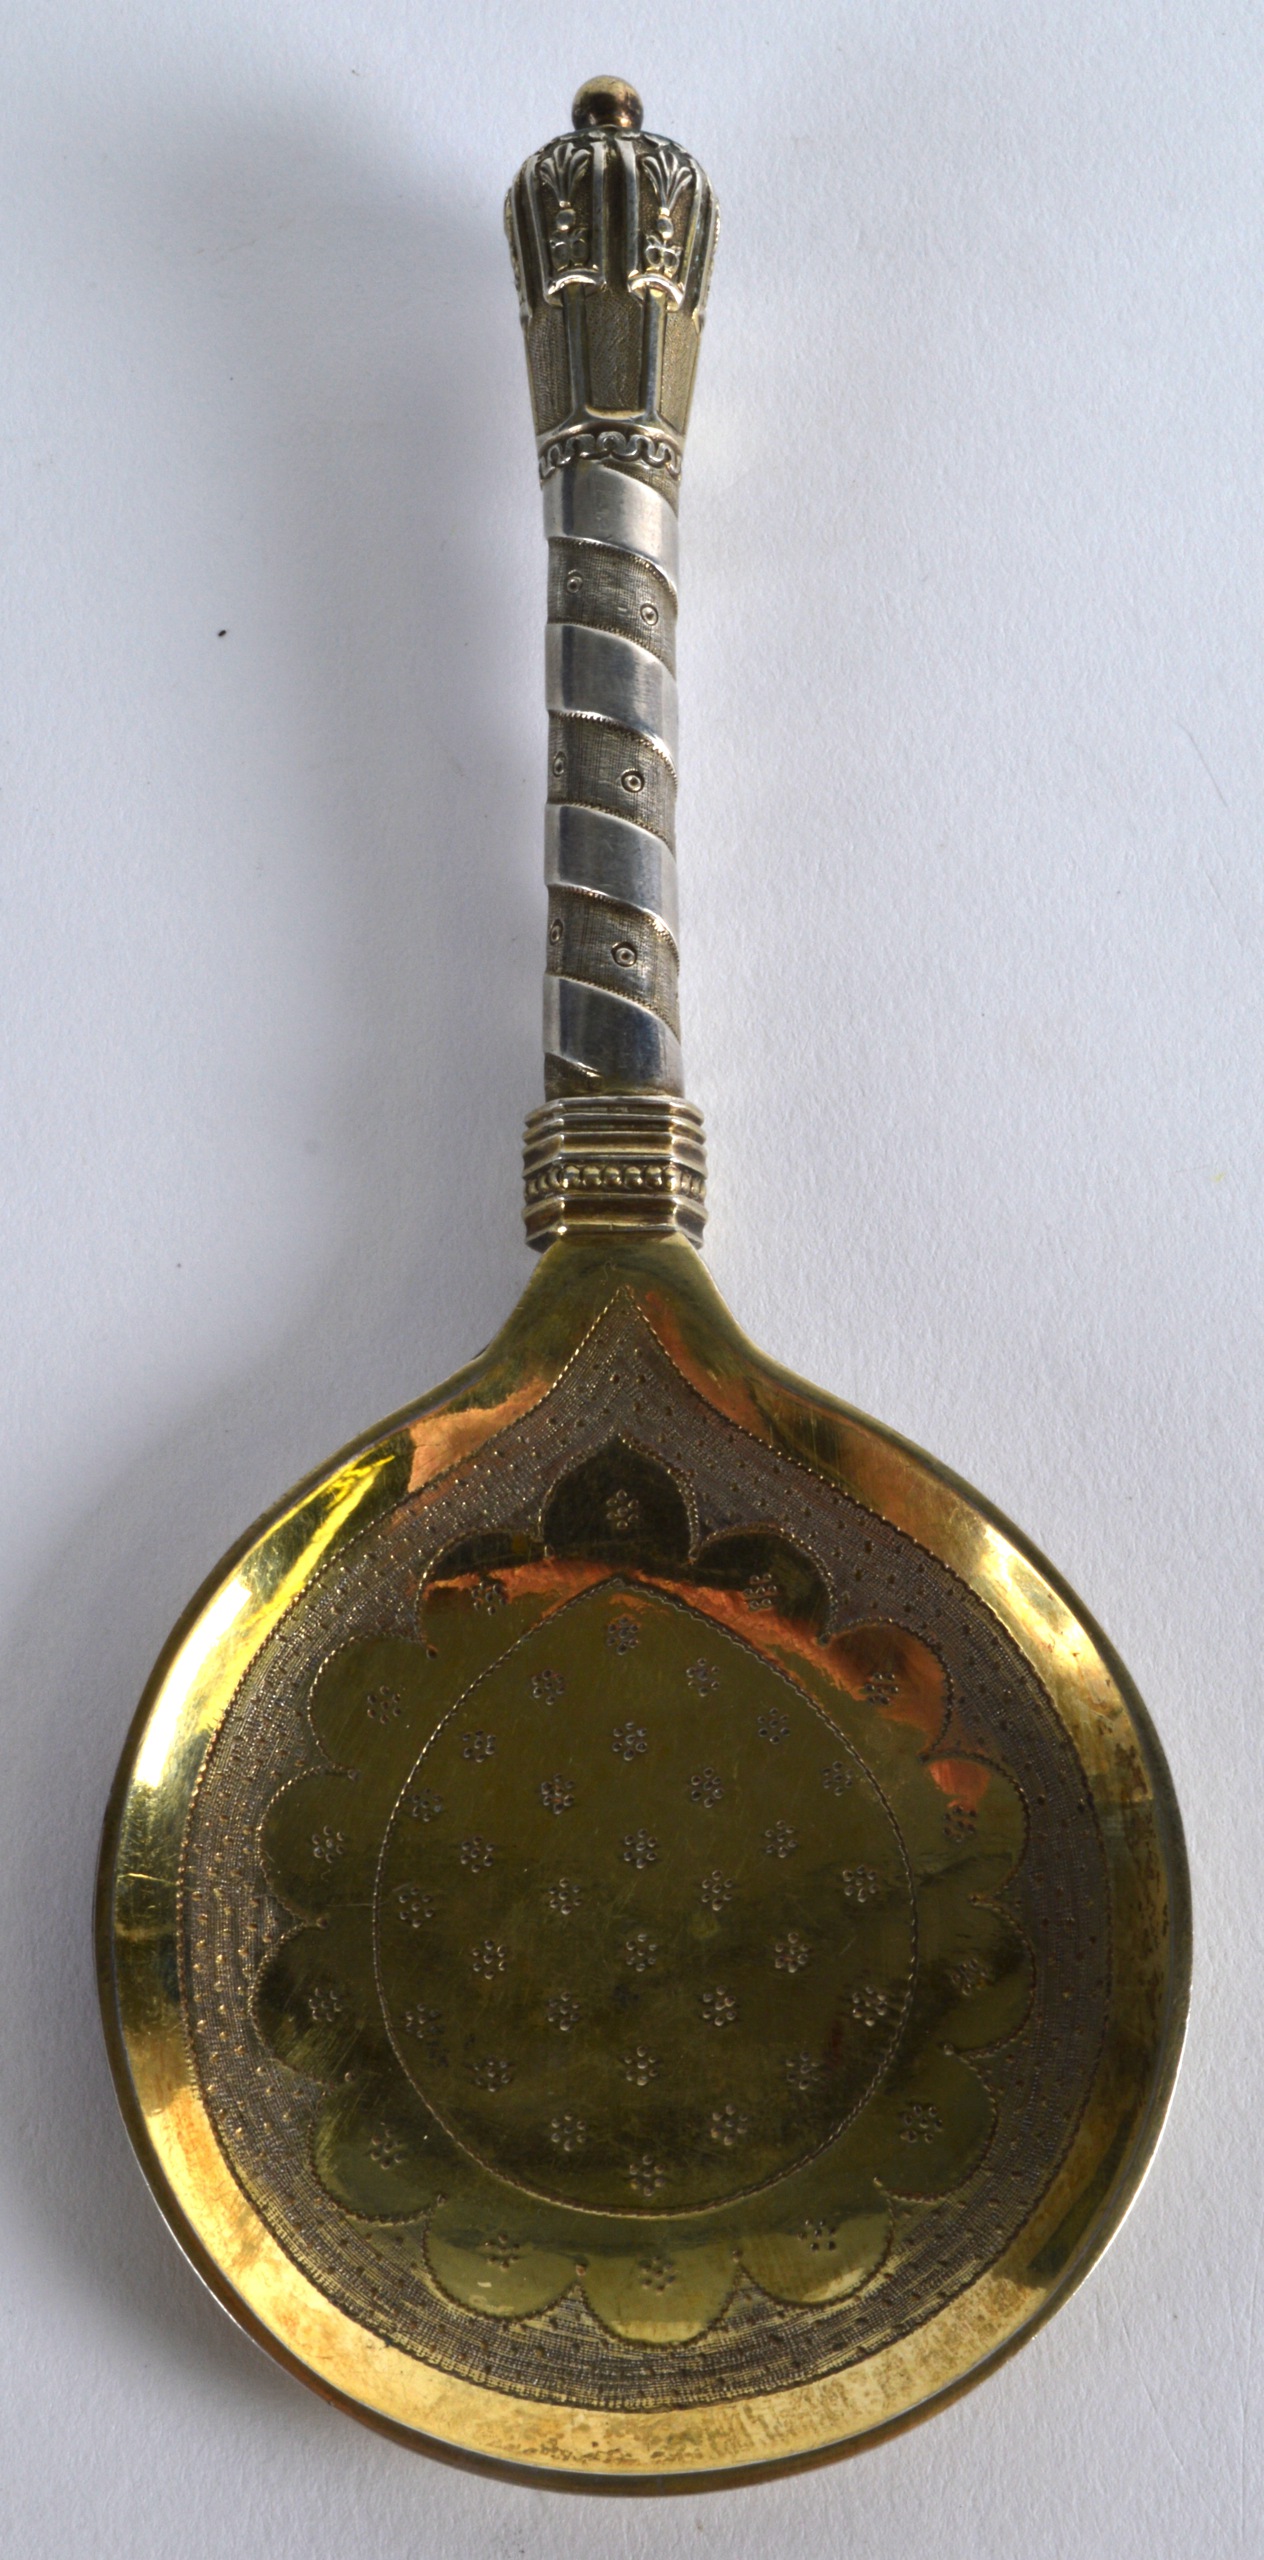 A 19TH CENTURY EUROPEAN SILVER GILT SPOON possibly Russian, with twist handle. 6.5ins long.